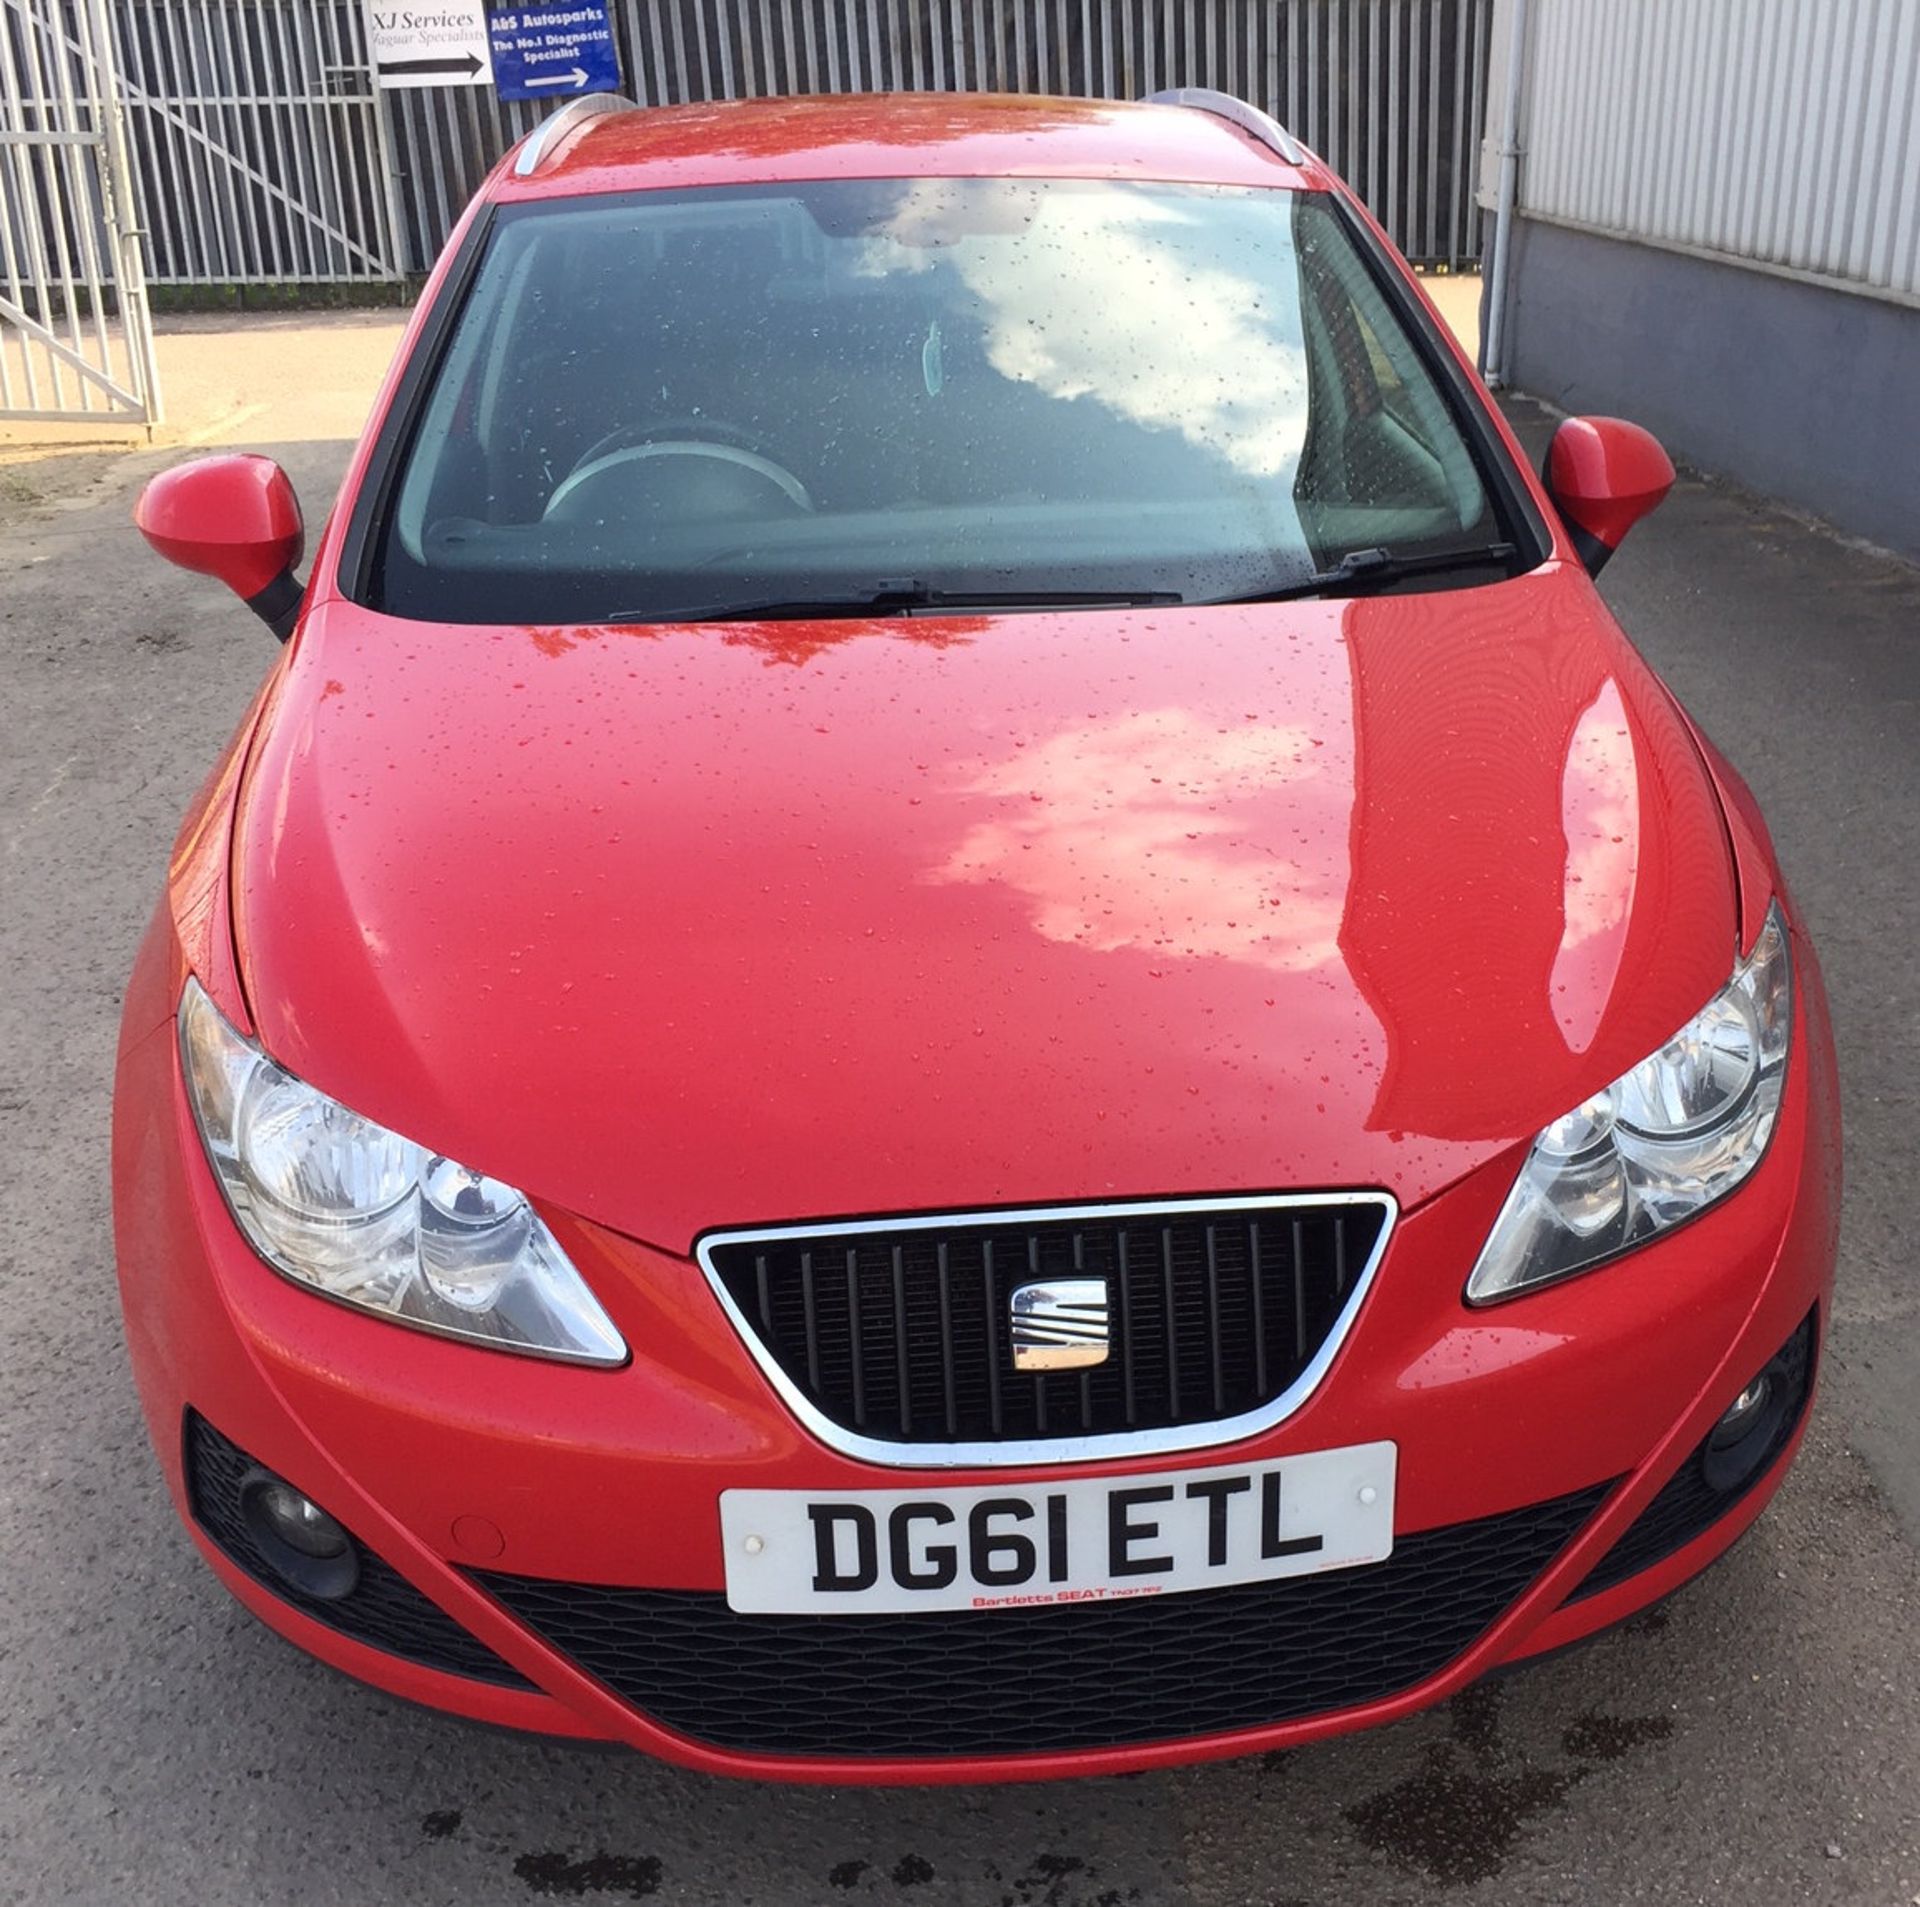 2011 Seat Ibiza 1.2 Tsi Sportrider 5 Dr Estate - CL505 - NO VAT ON THE HAMMER - Location: Corby, Nor - Image 7 of 13